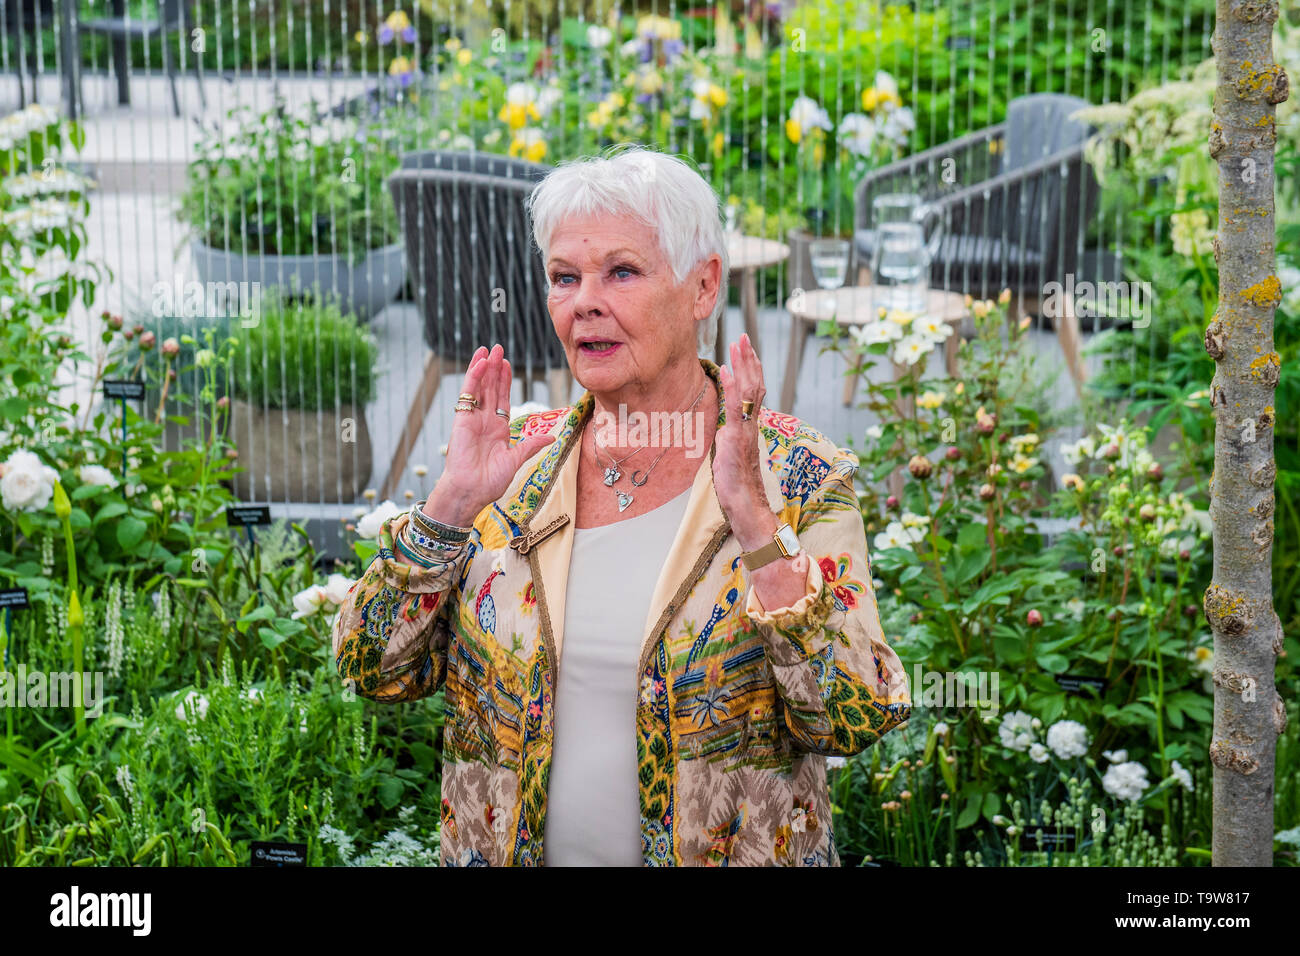 London, UK. 20th May, 2019. Dame Judi Dench launches a re-elming initiative on the Hillier Nurseries stand - Press preview day at The RHS Chelsea Flower Show. Credit: Guy Bell/Alamy Live News Stock Photo